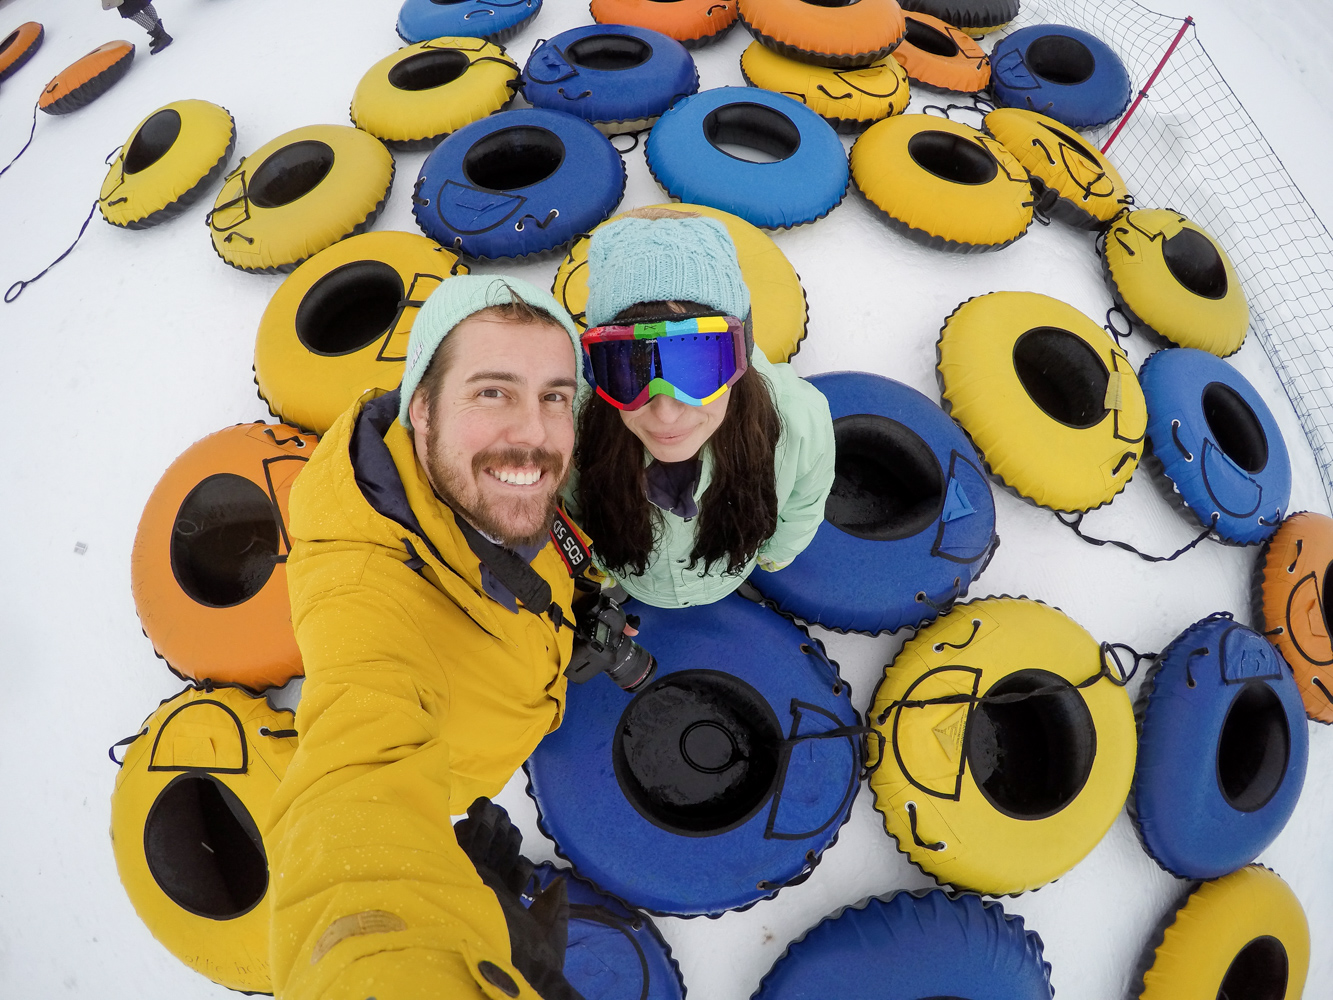 Date Night- Snow Tubing at Solider Hollow